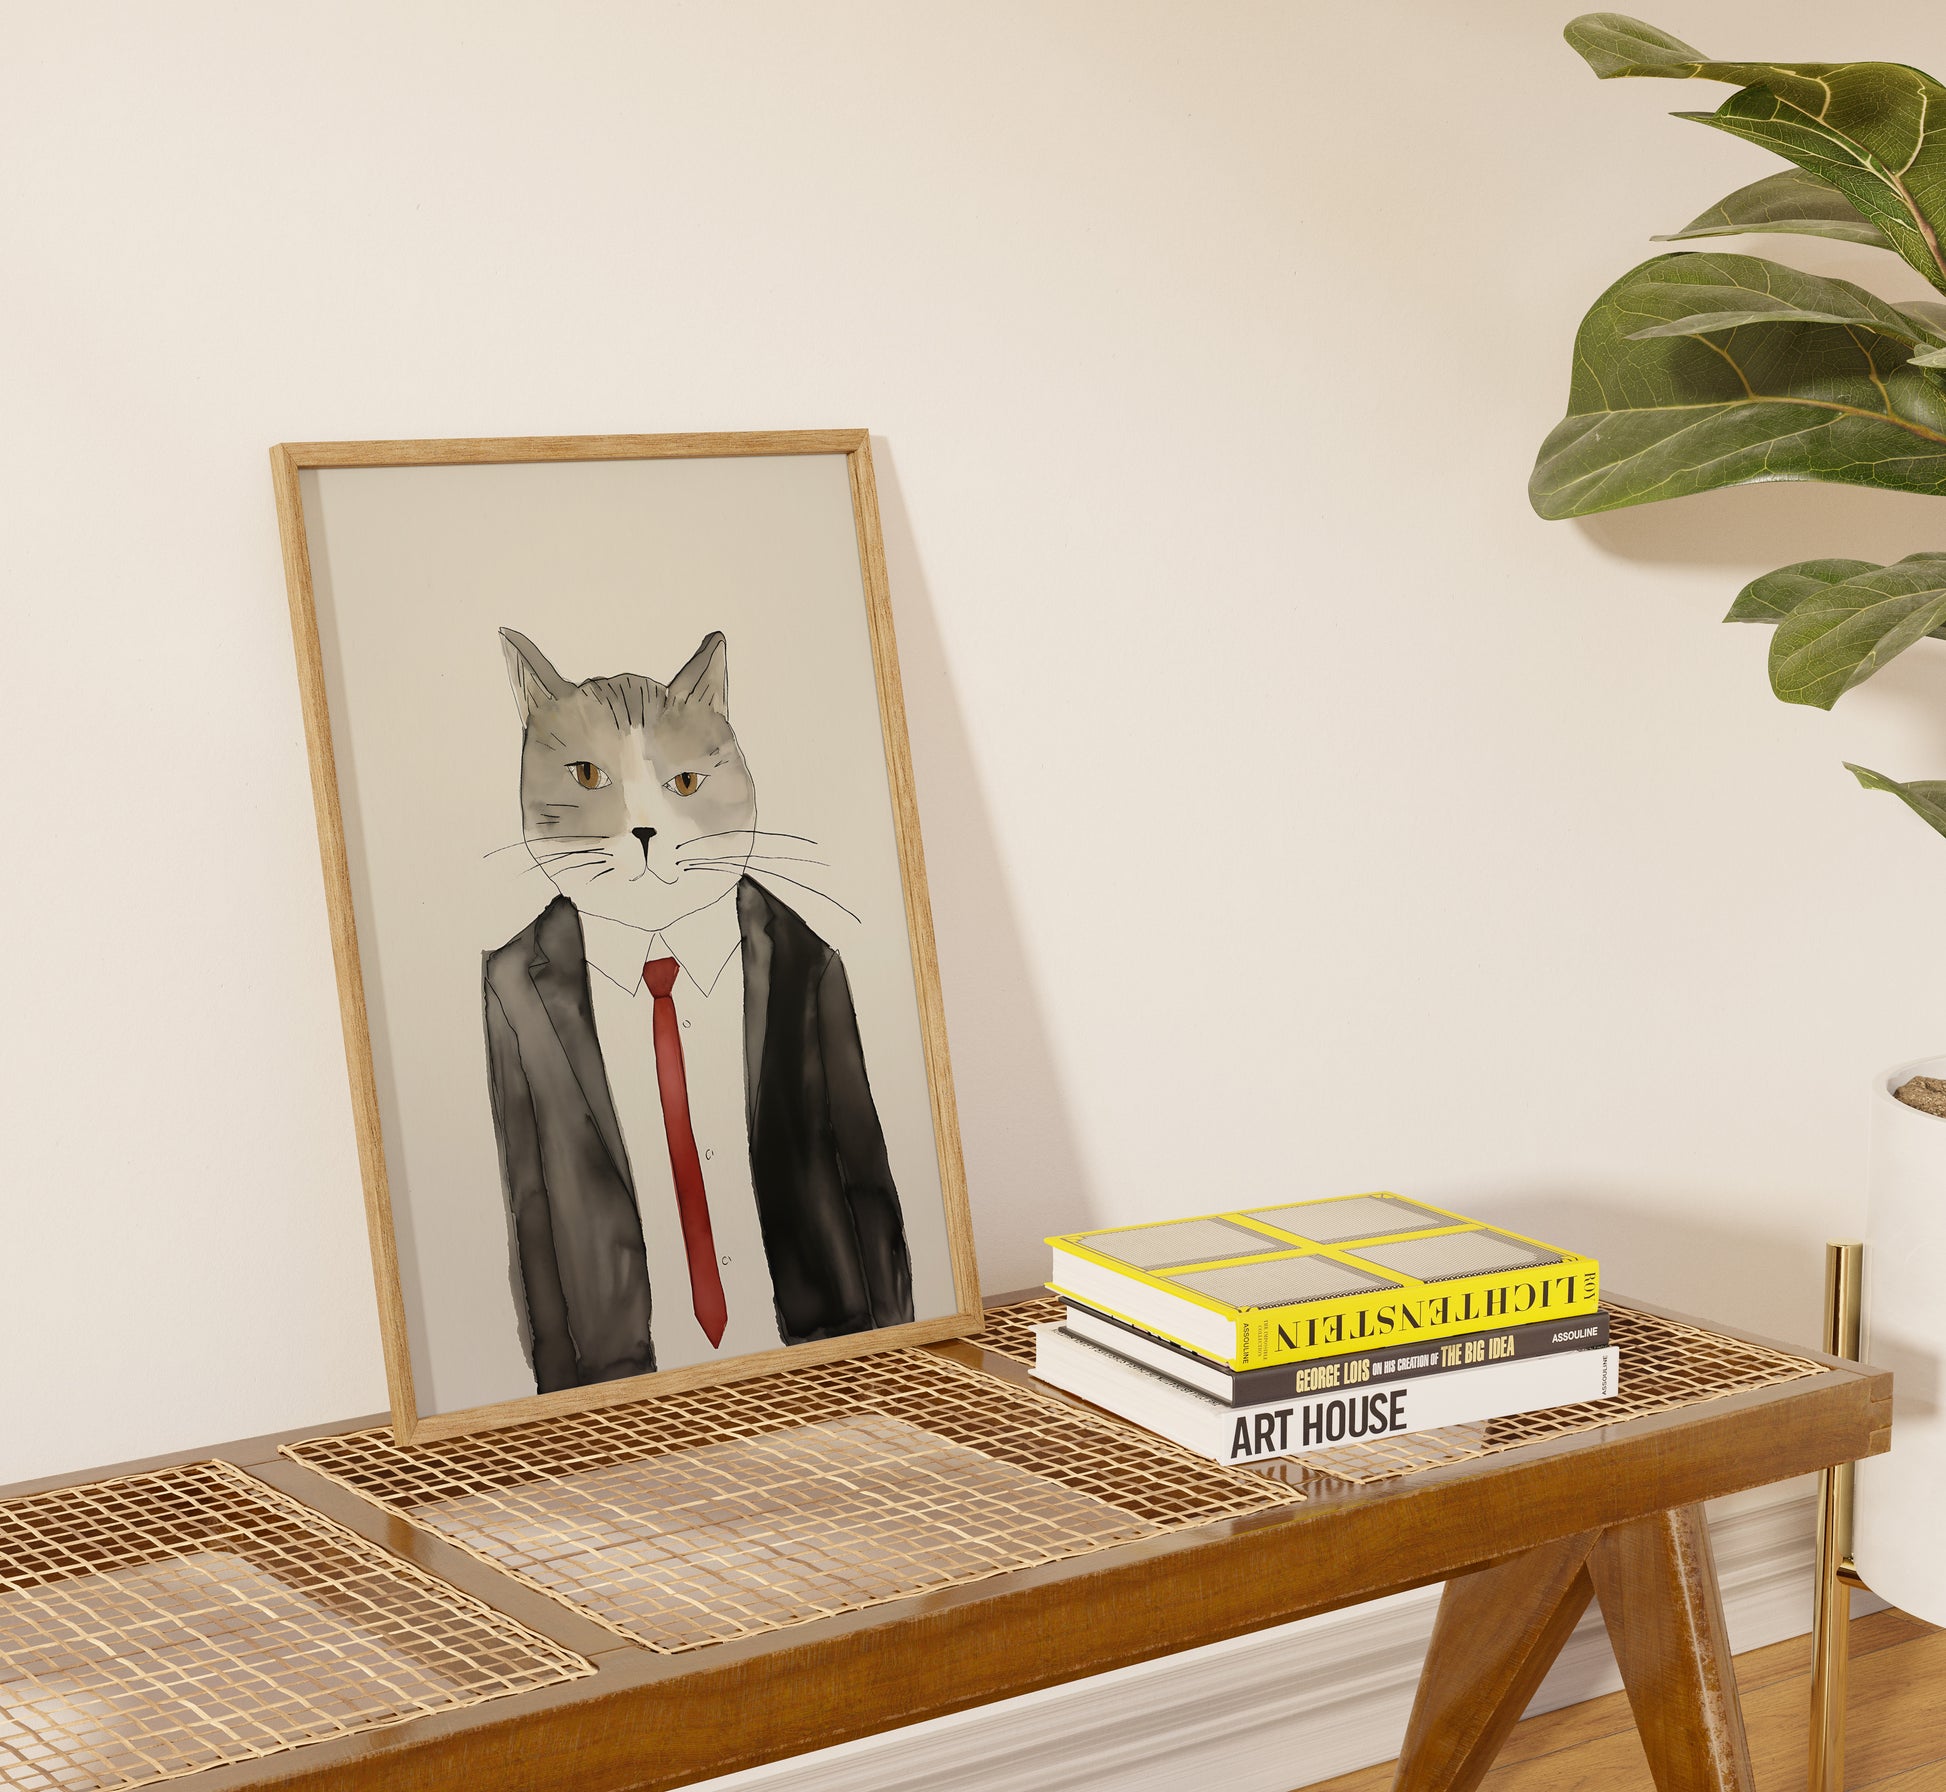 A whimsical illustration of a cat in a suit and tie next to books on a shelf.